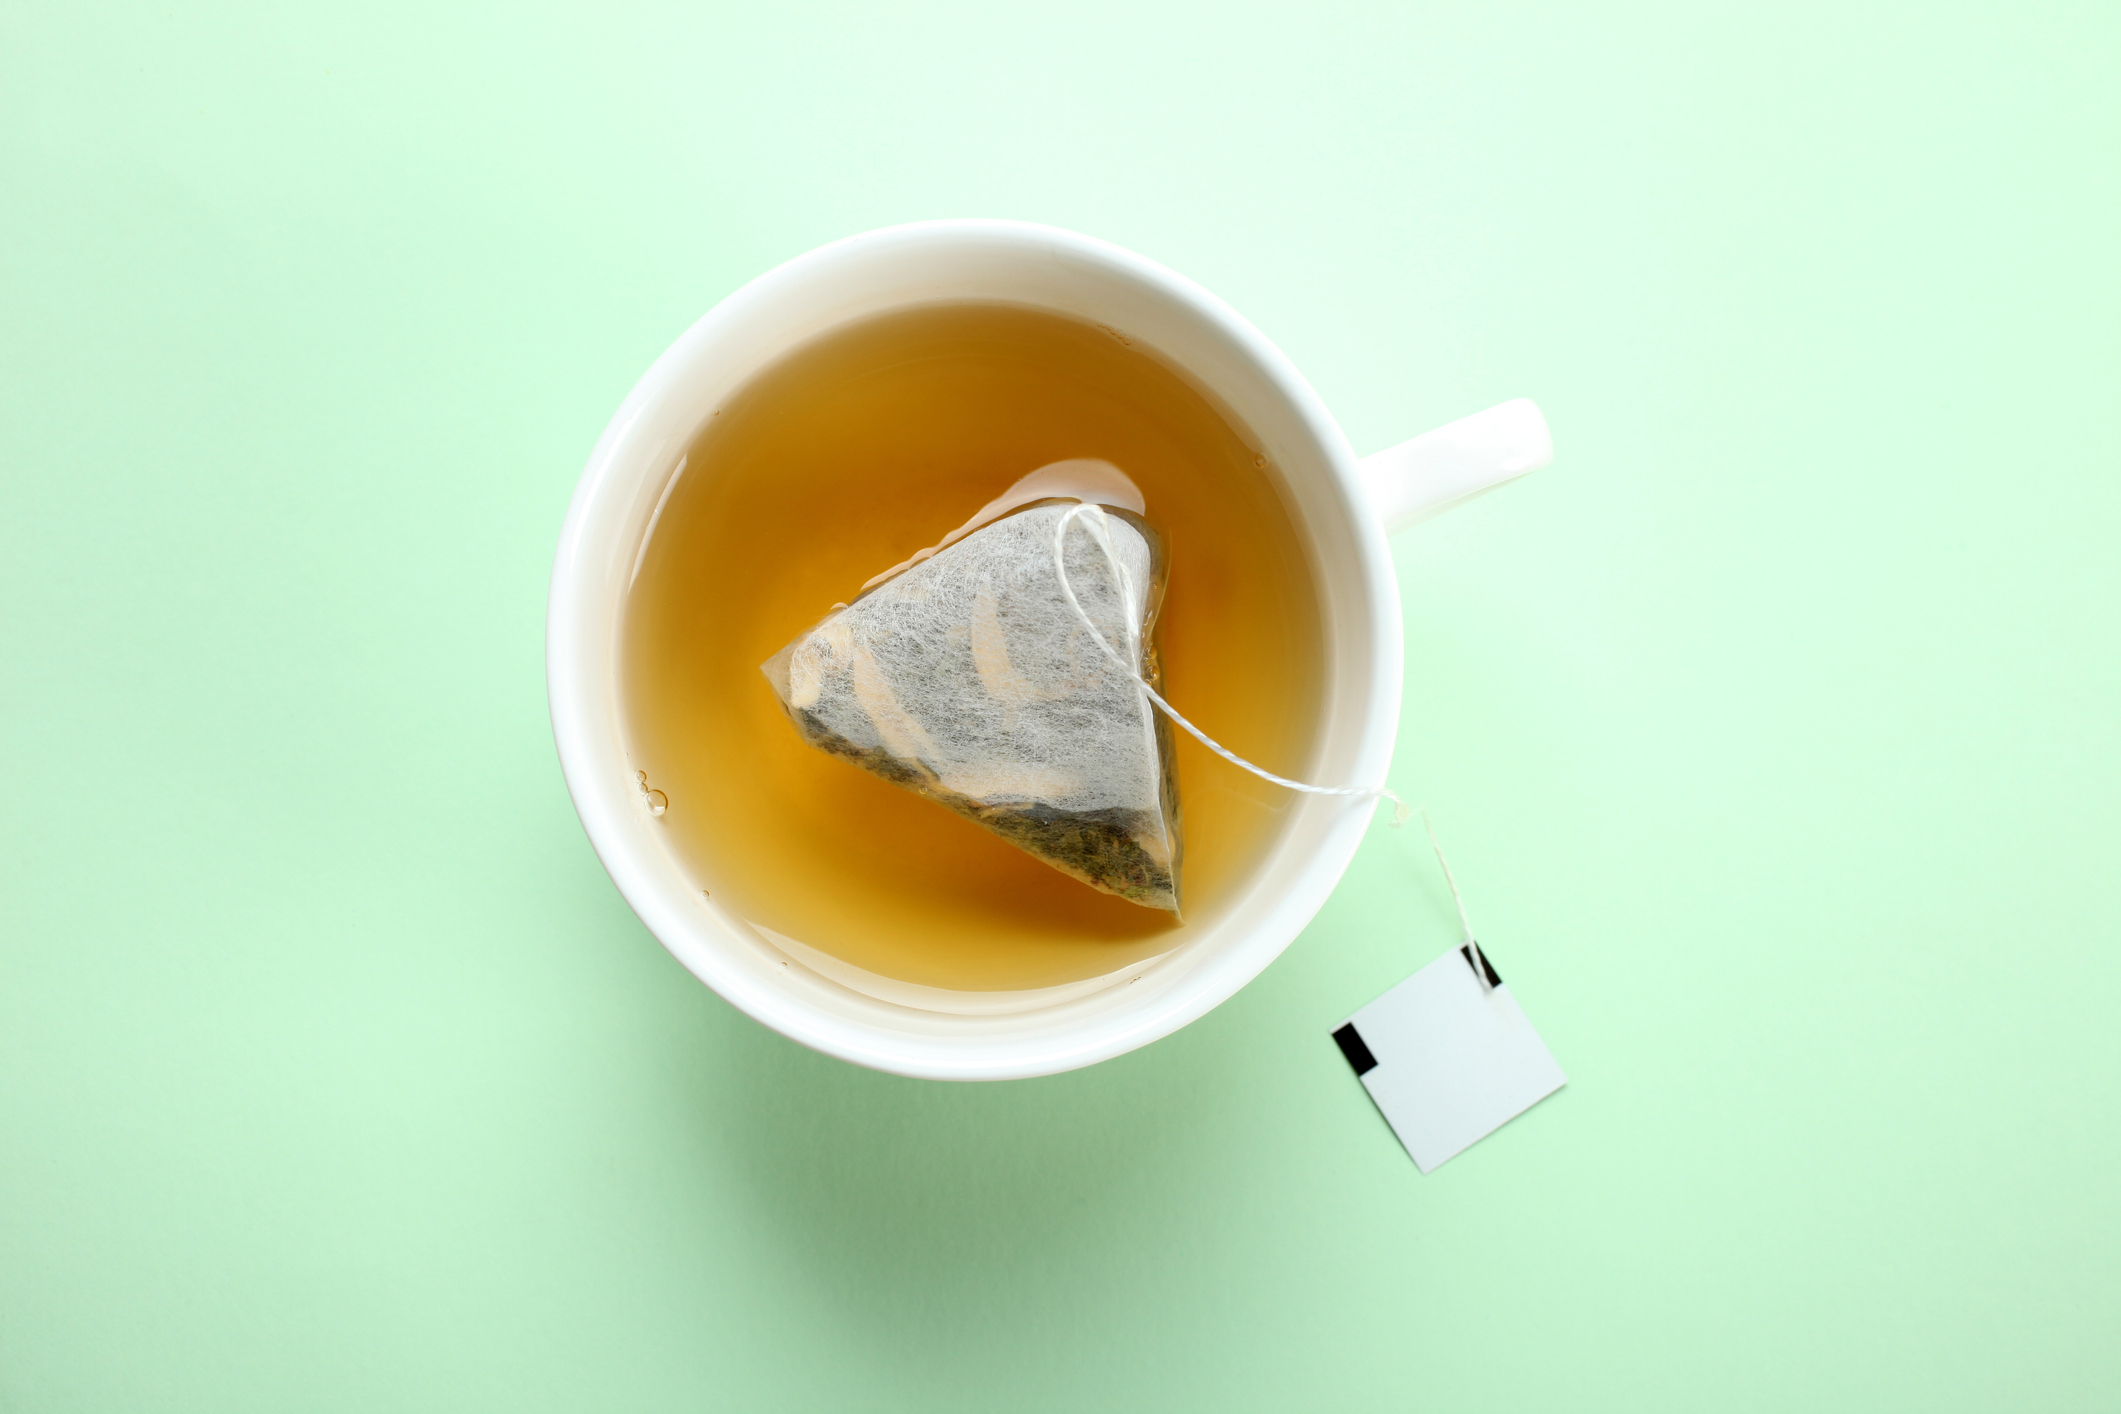 https://www.beveragedaily.com/var/wrbm_gb_food_pharma/storage/images/publications/food-beverage-nutrition/beveragedaily.com/article/2019/09/30/plastic-tea-bags-release-microplastics-into-brew-says-study/10195151-3-eng-GB/Plastic-tea-bags-release-microplastics-into-brew-says-study.jpg